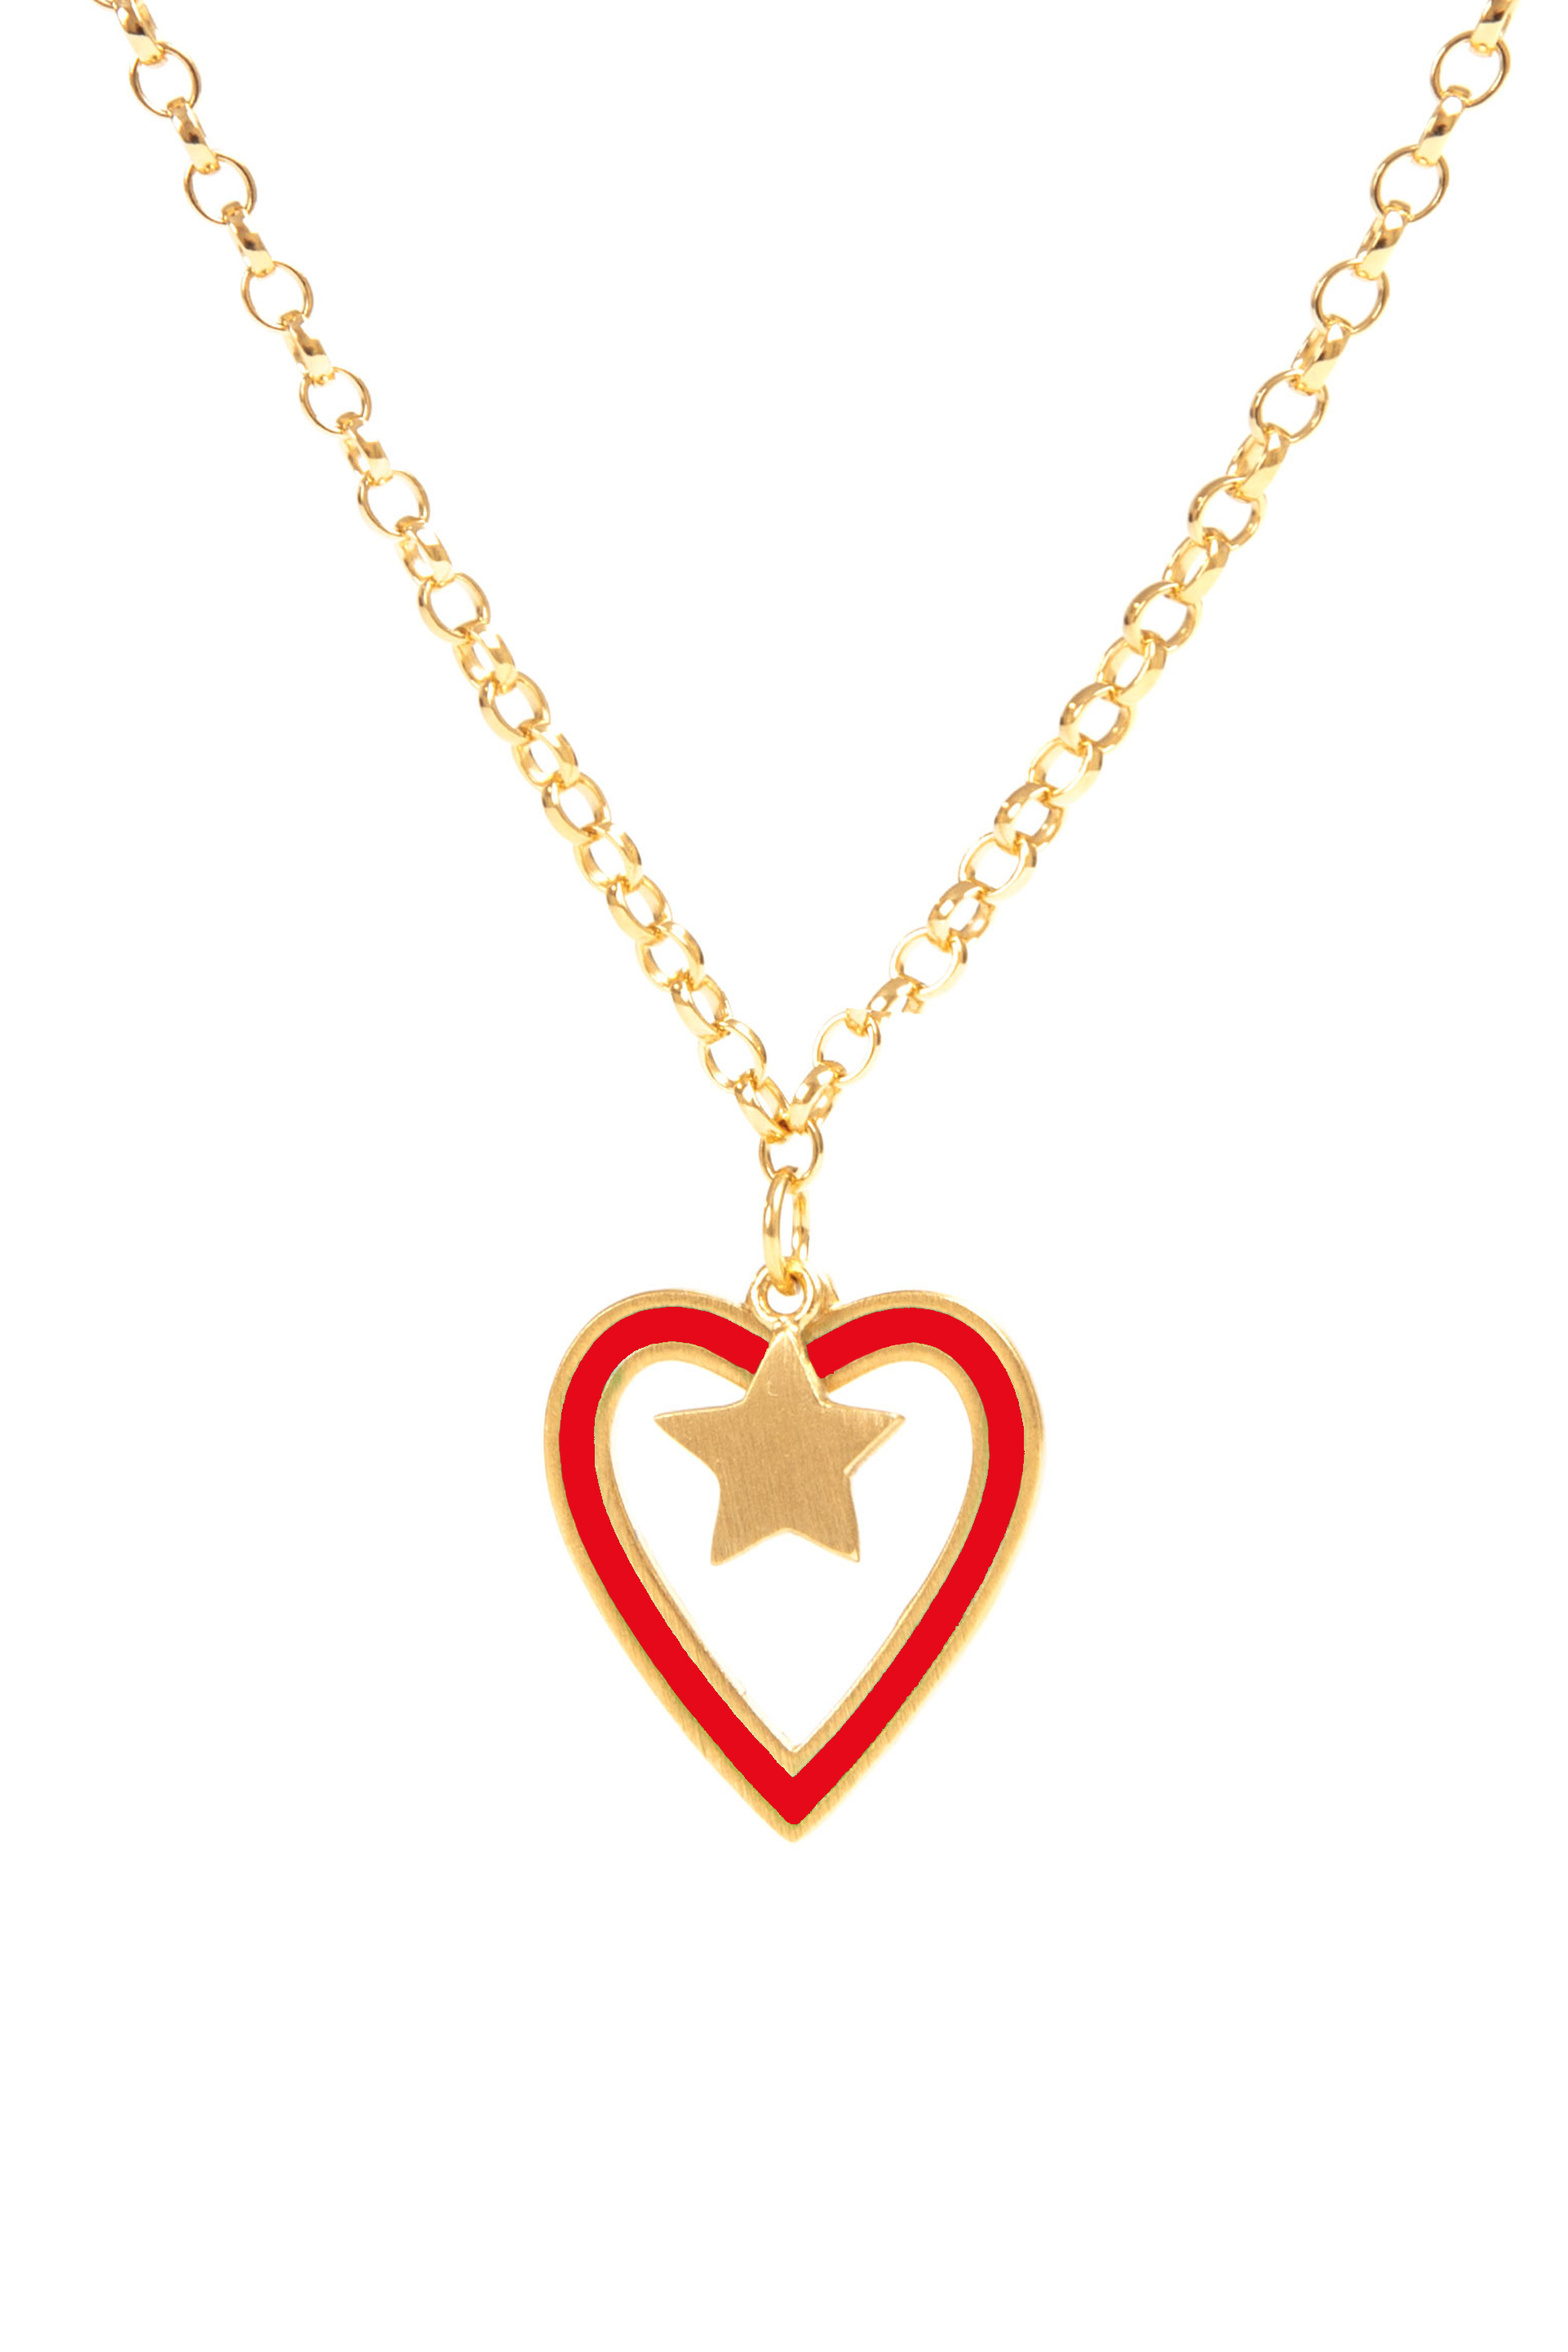 cb163_heart_necklace_red_heart_gold_chain_resized.jpg